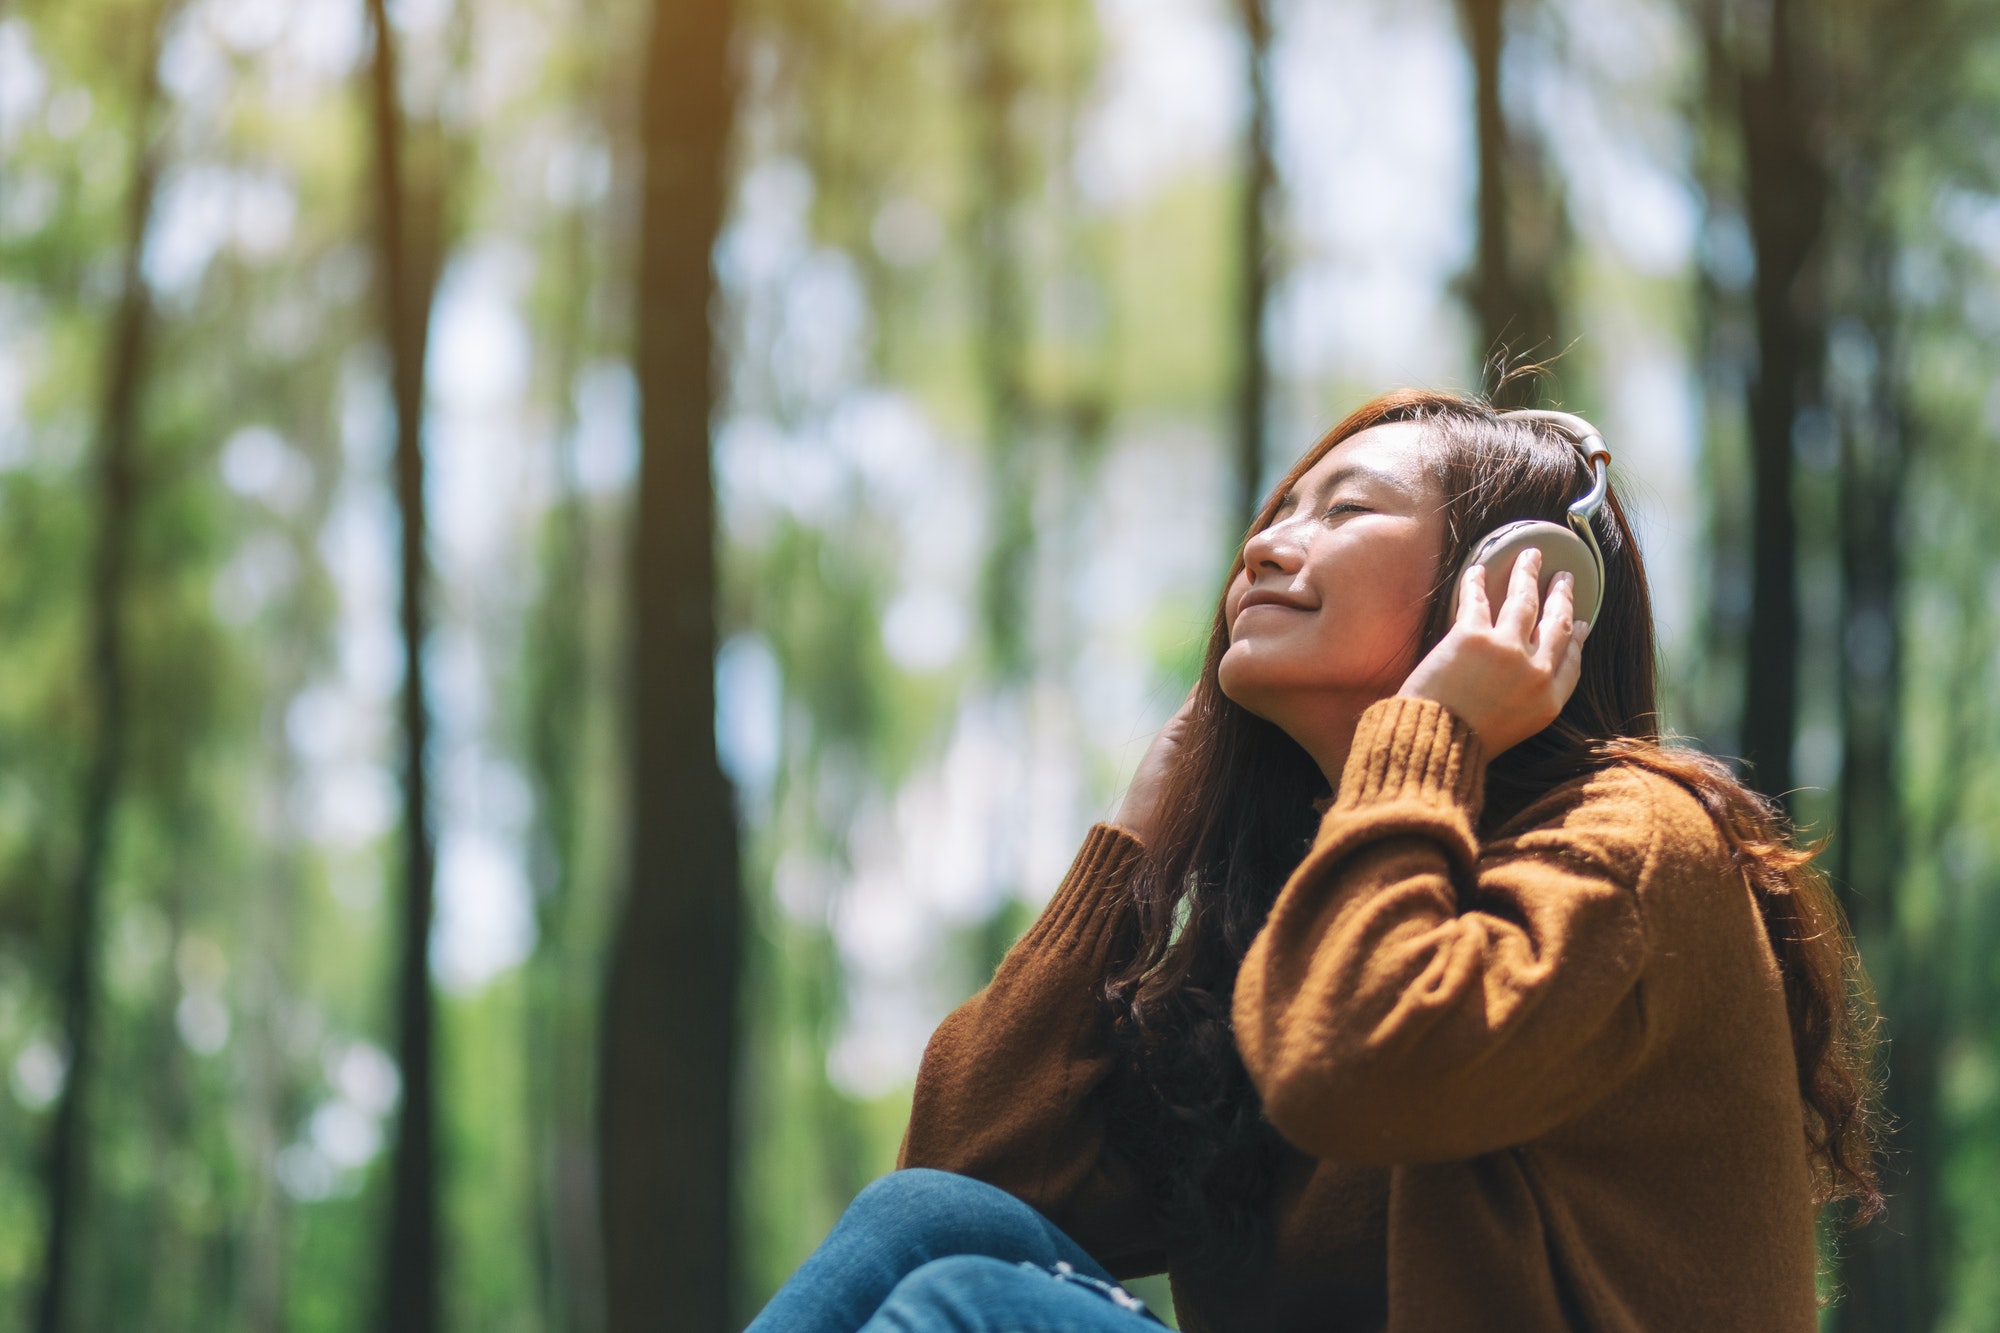 A woman enjoy listening to music with headphone with feeling happy and relaxed in the park